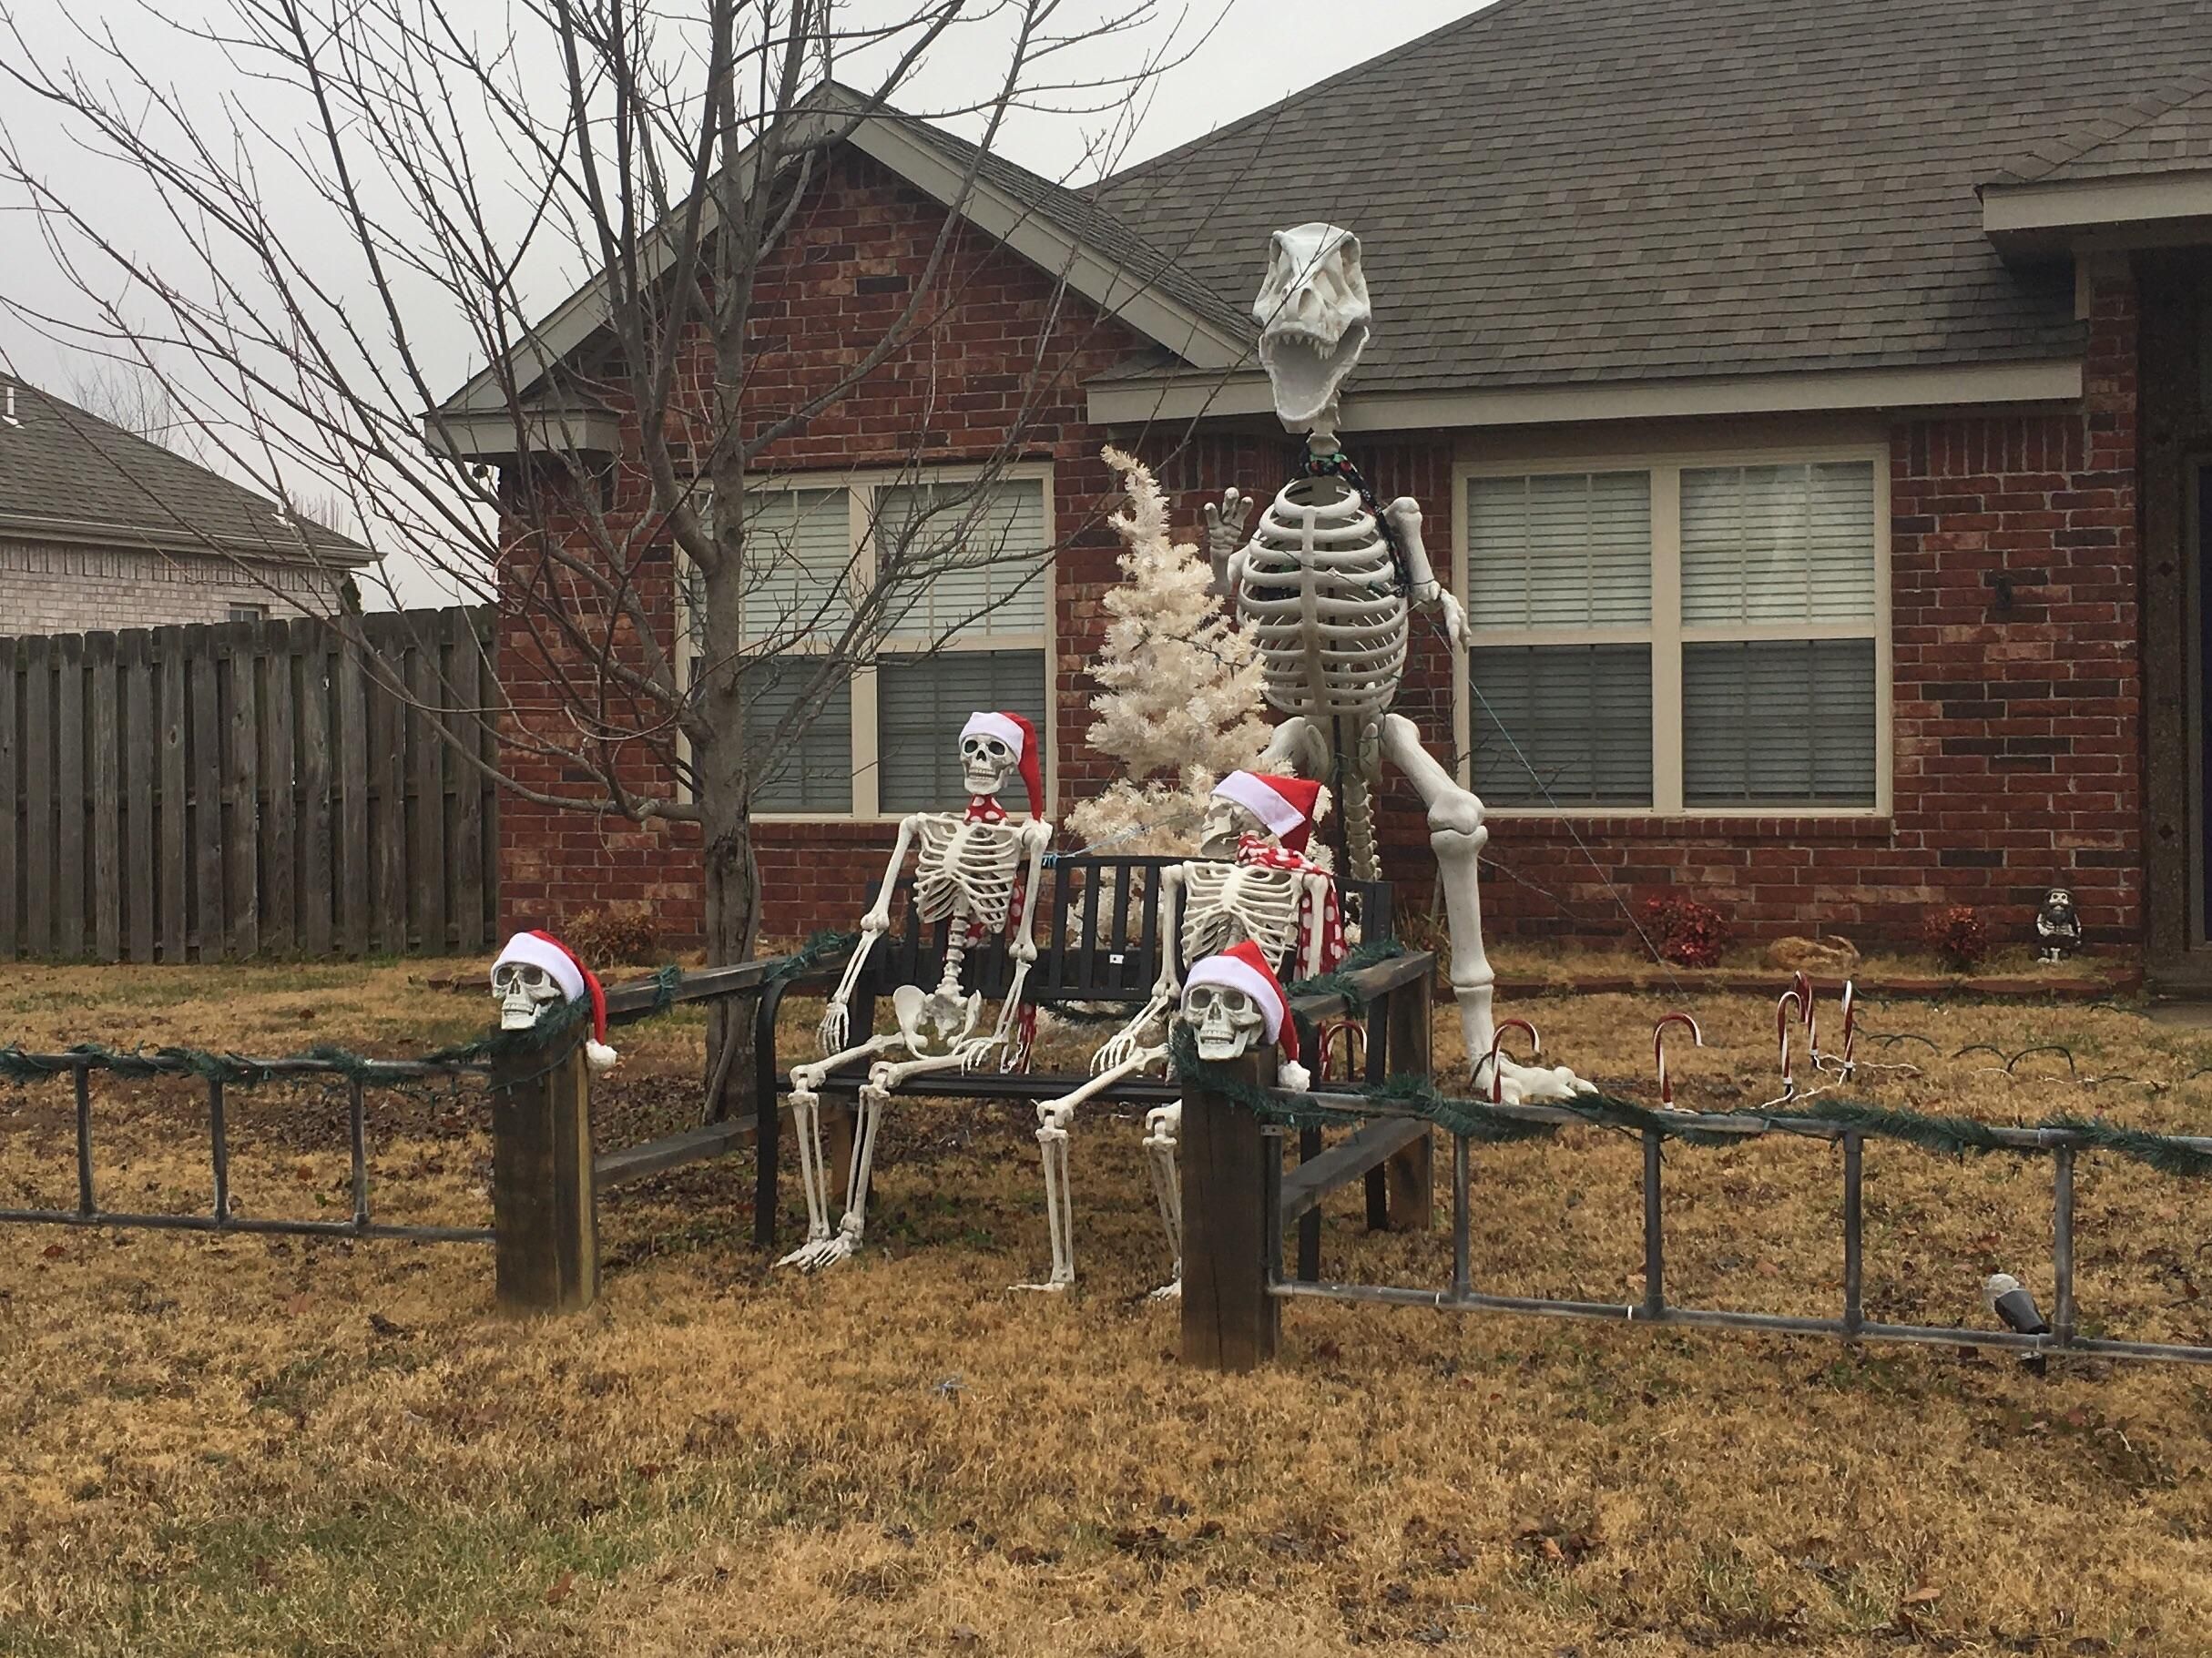 My neighbors just added Santa hats to their Halloween decorations.